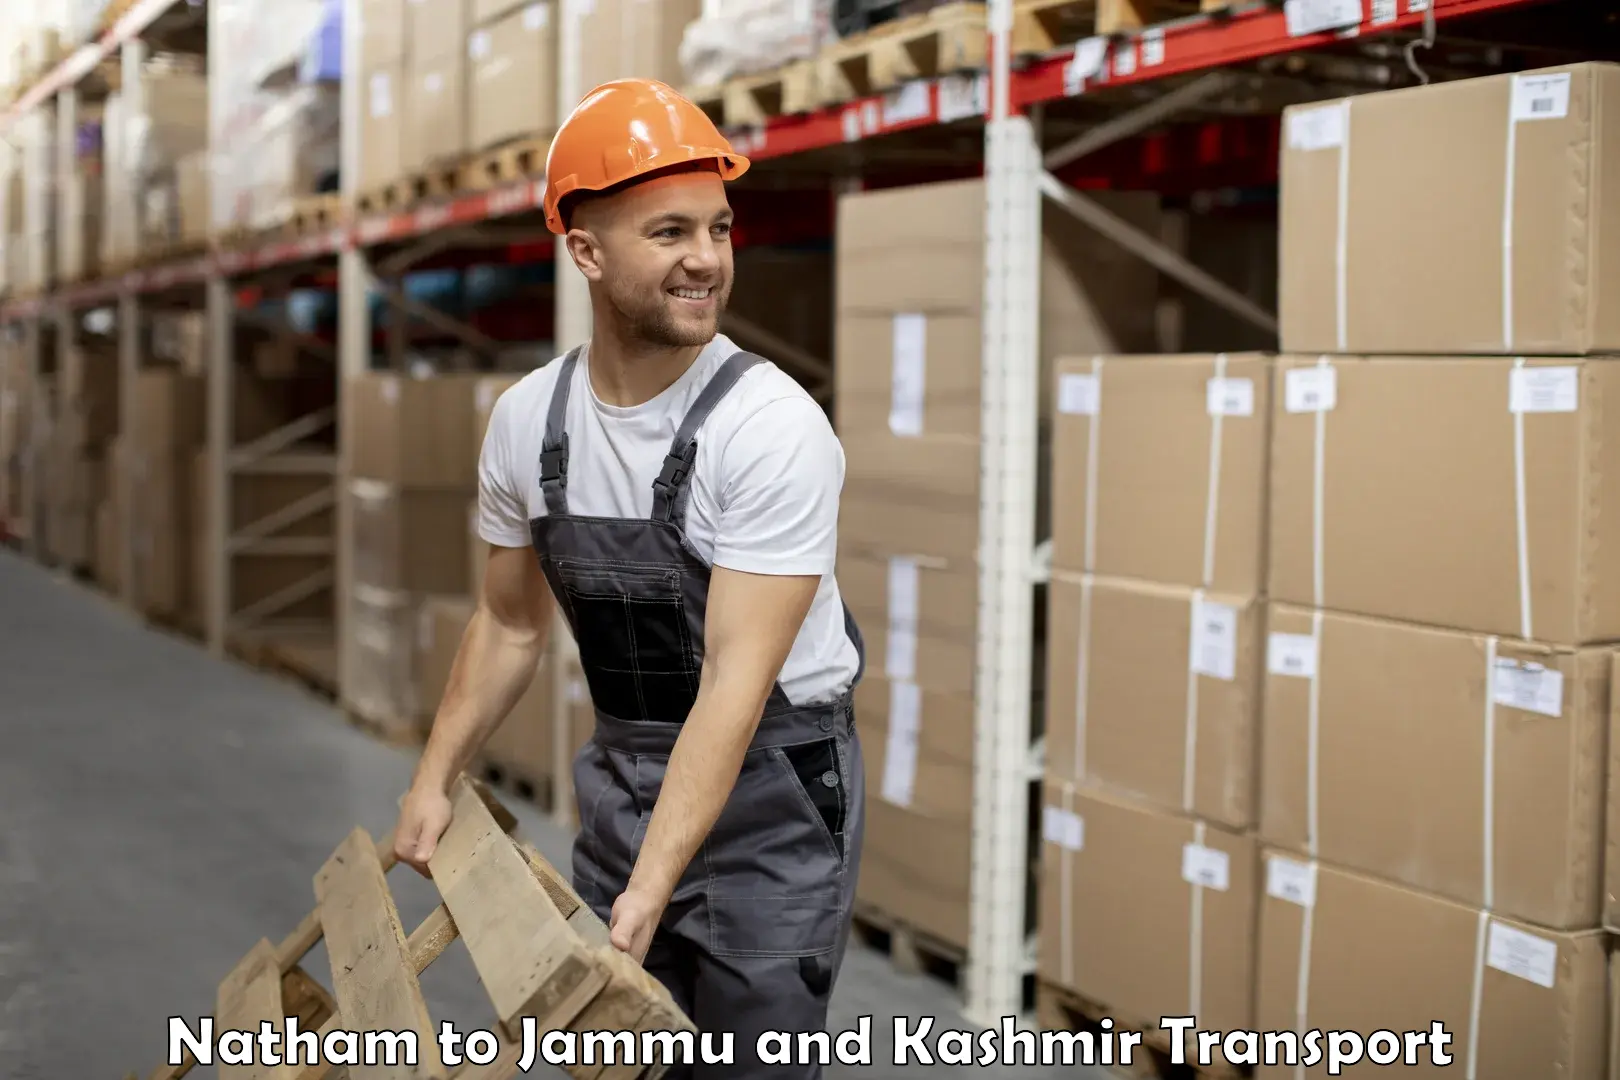 Goods delivery service Natham to Baramulla